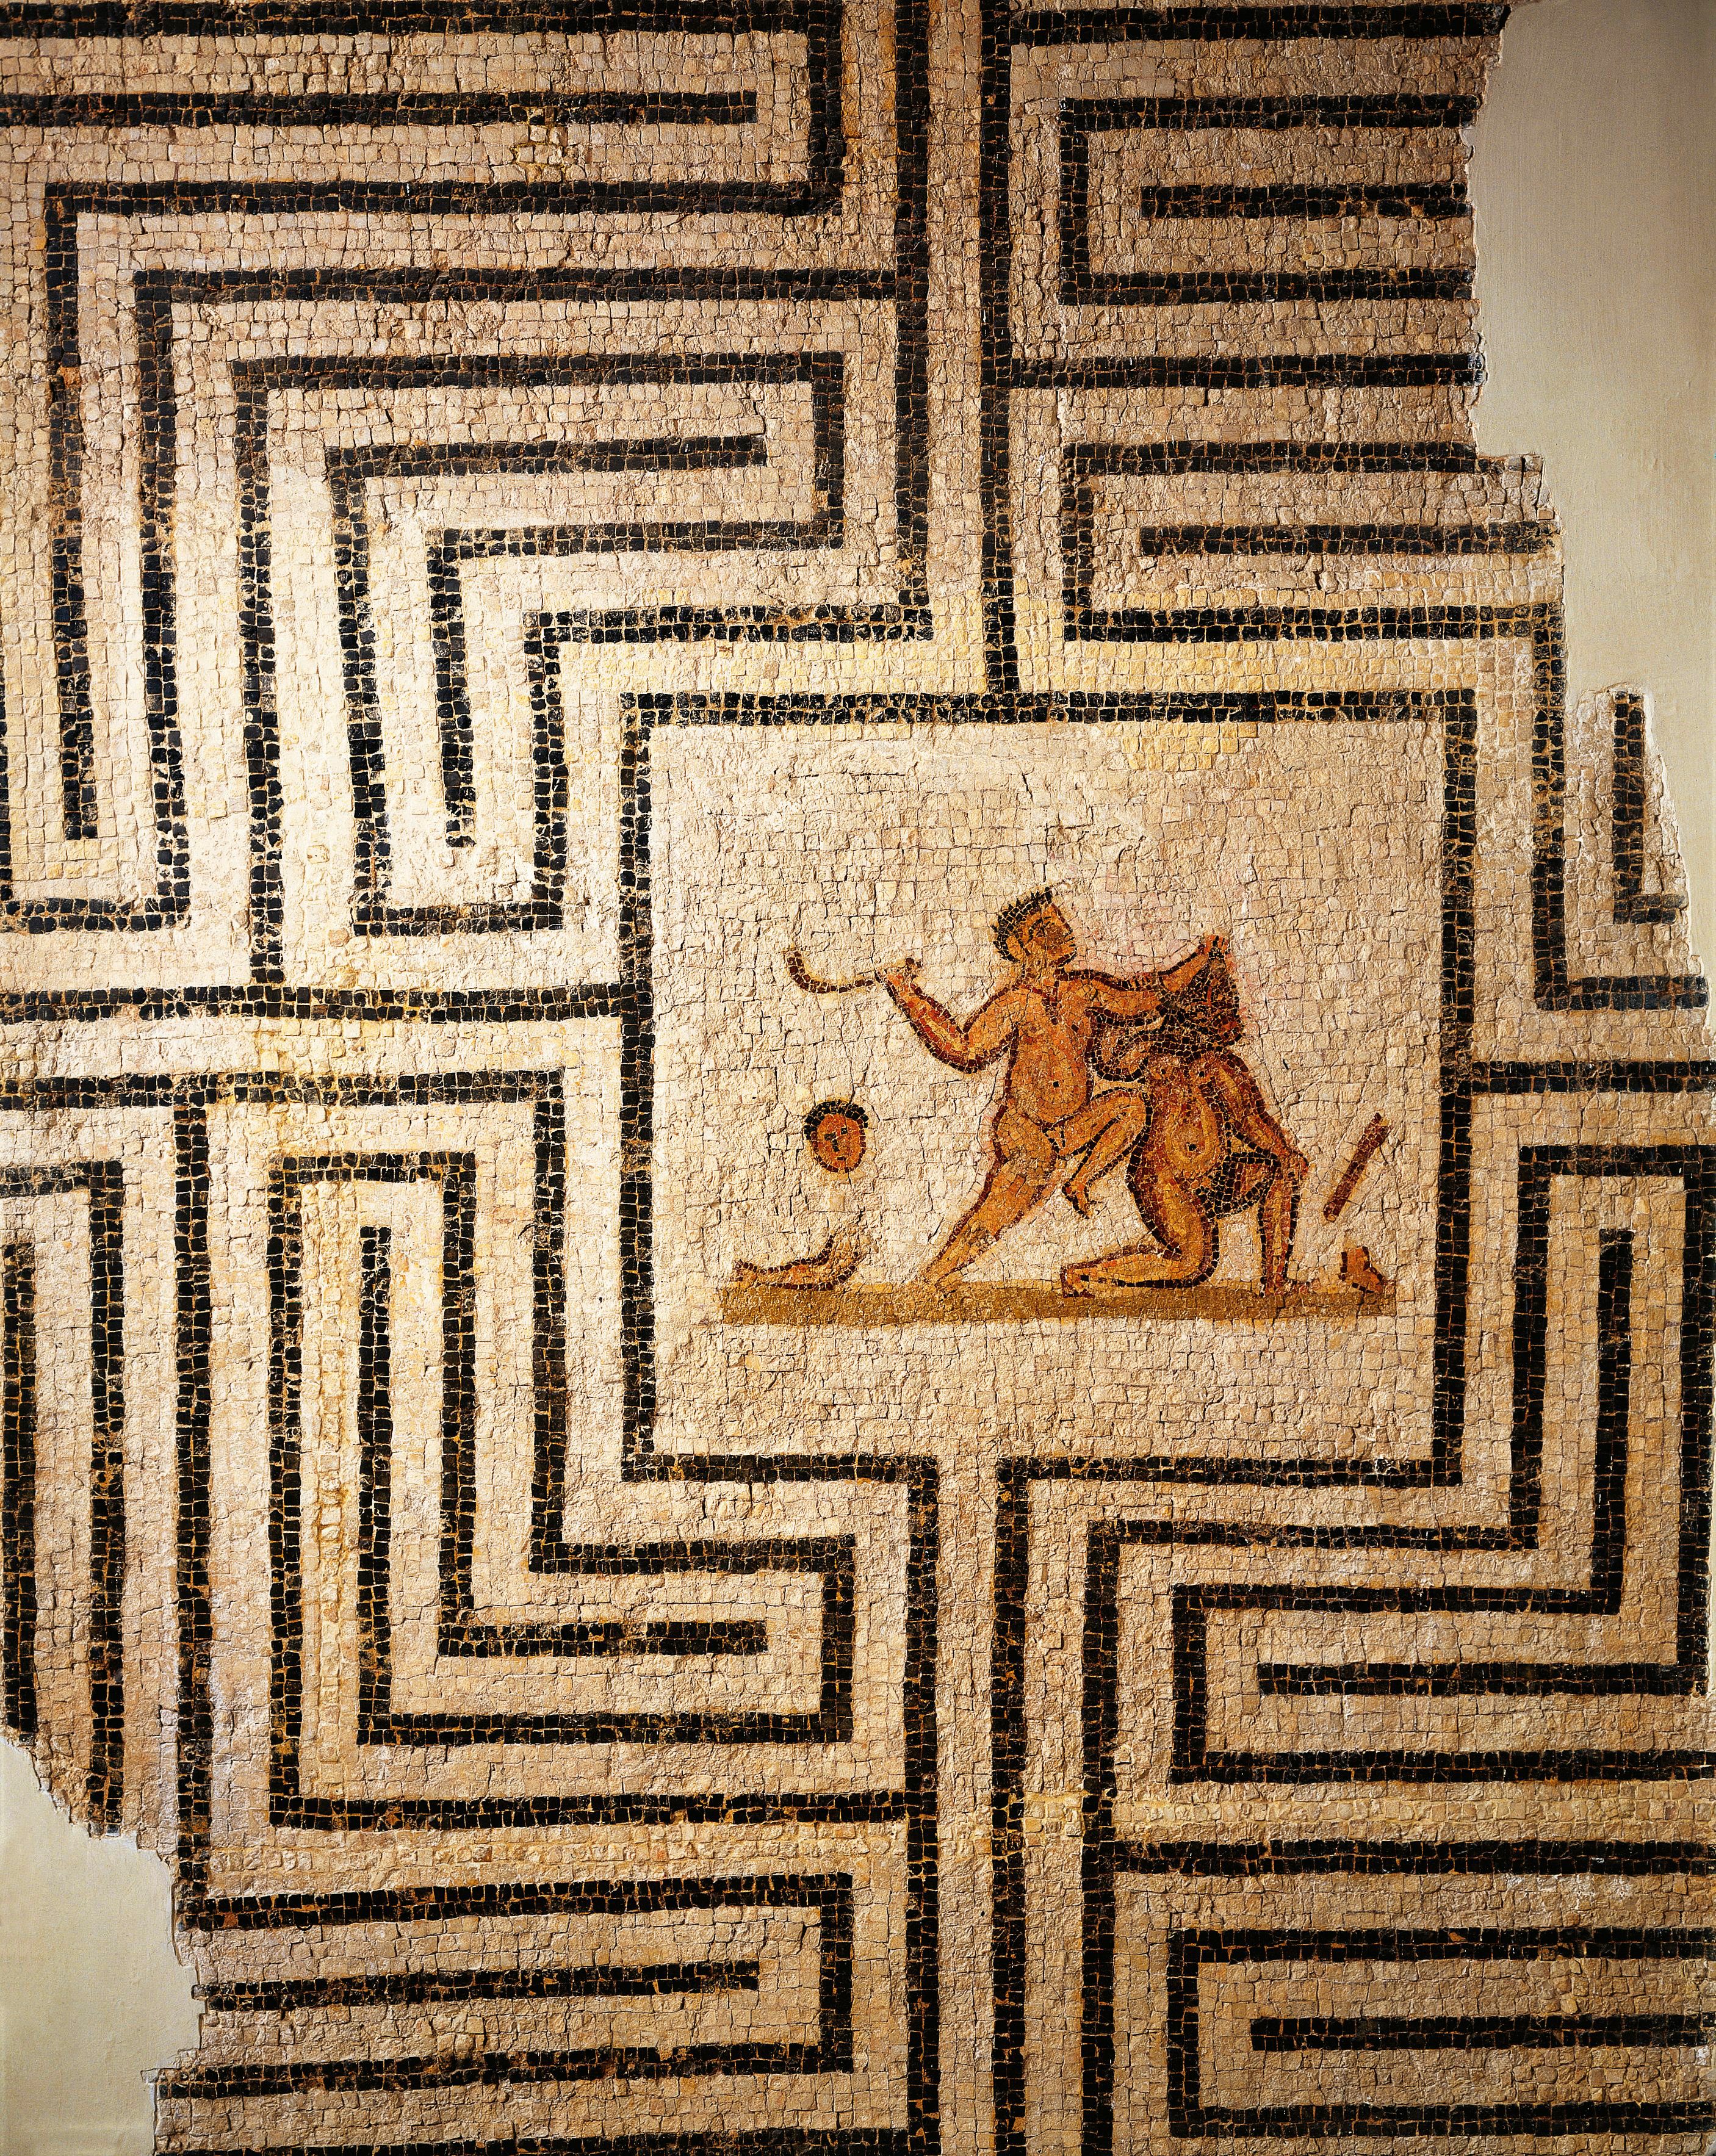 A mosaic from the Roman site of Thuburbo Majus in Tunisia depicts Theseus and the Minotaur. 